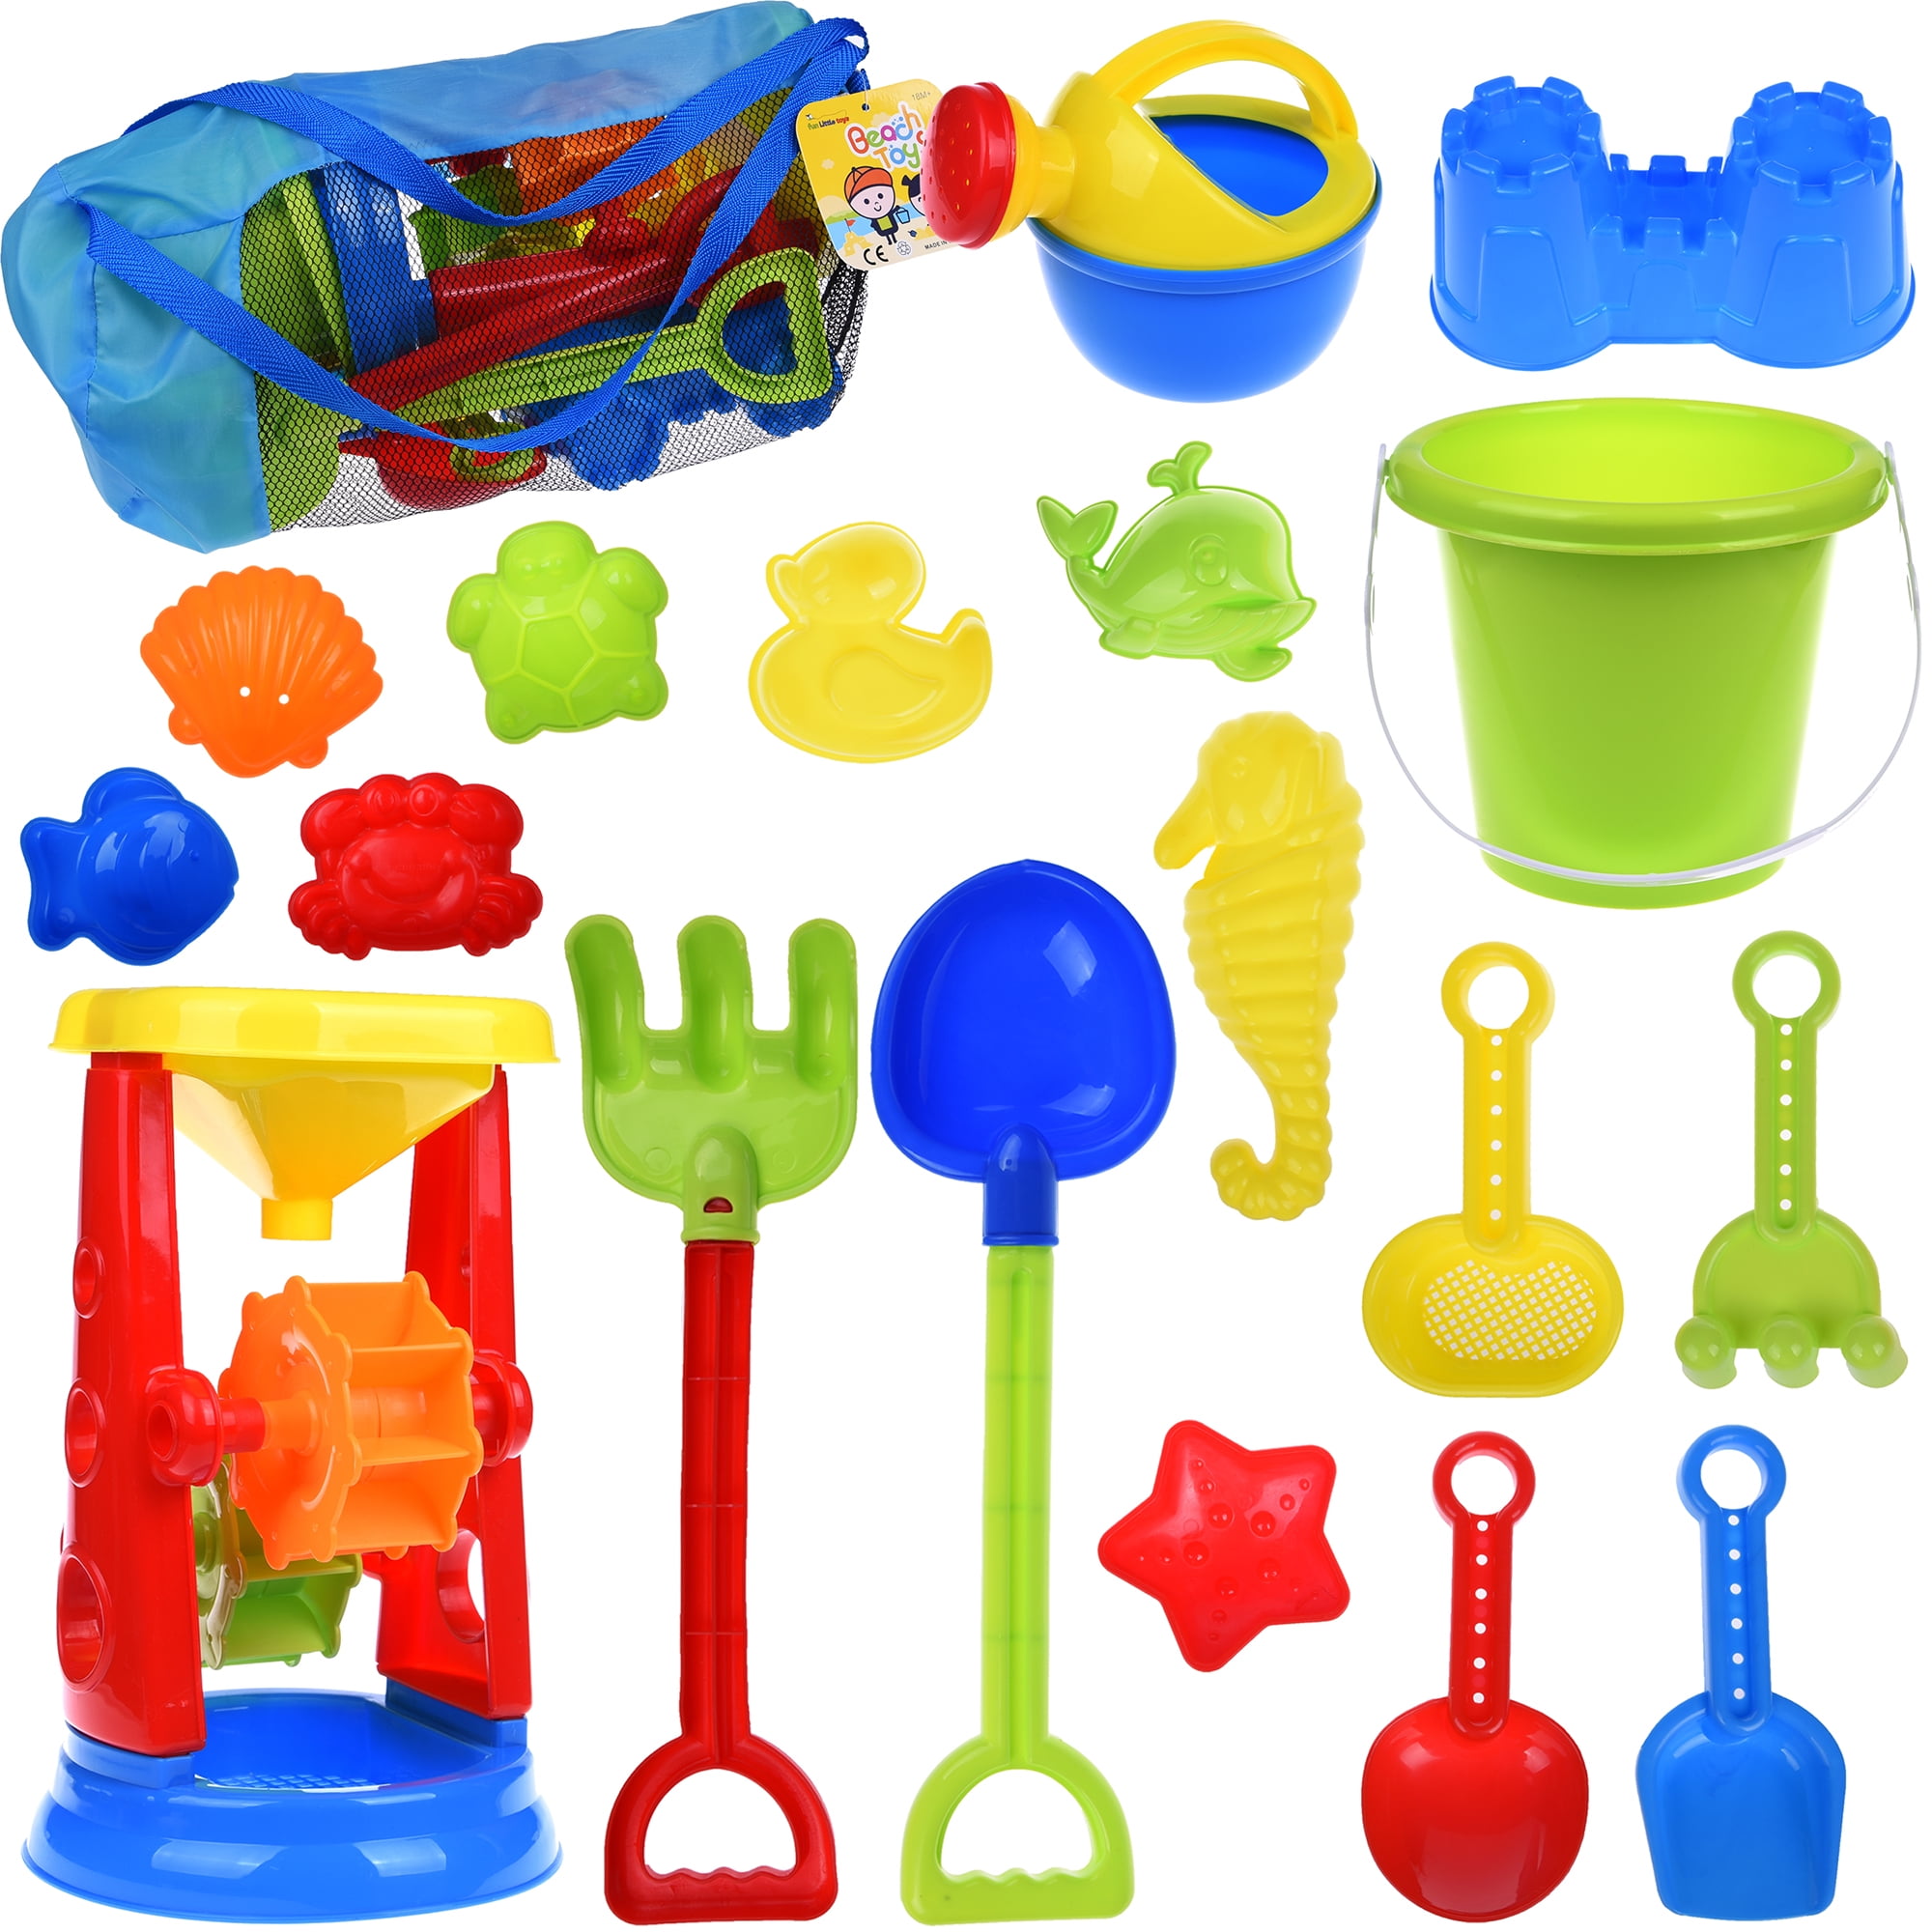 HomestreetUK Sand Beach Truck 6 Piece Set in Pink or Blue with Dump Truck including Watering Can Digging Tools and Sand Moulds for Seaside or Sandpit Play PINK